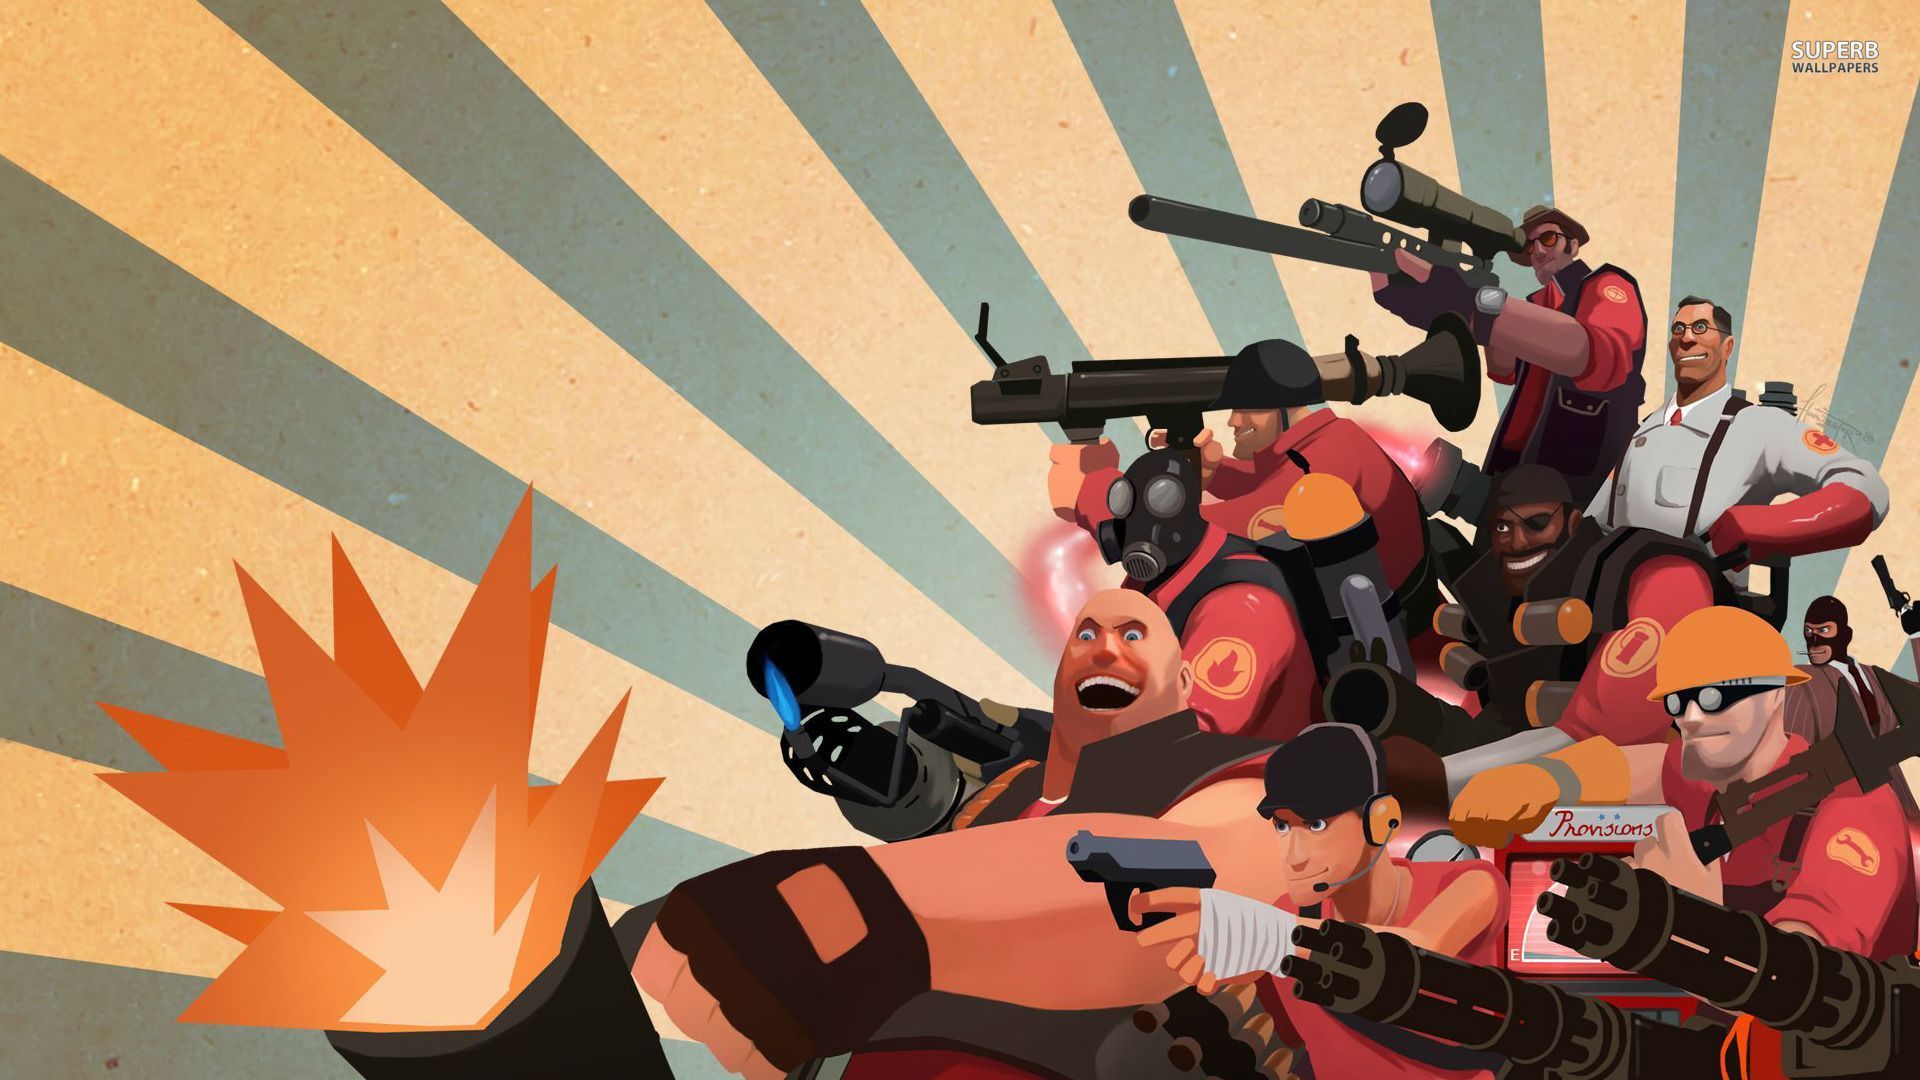 Team Fortress 2 Wallpapers High Quality | Download Free